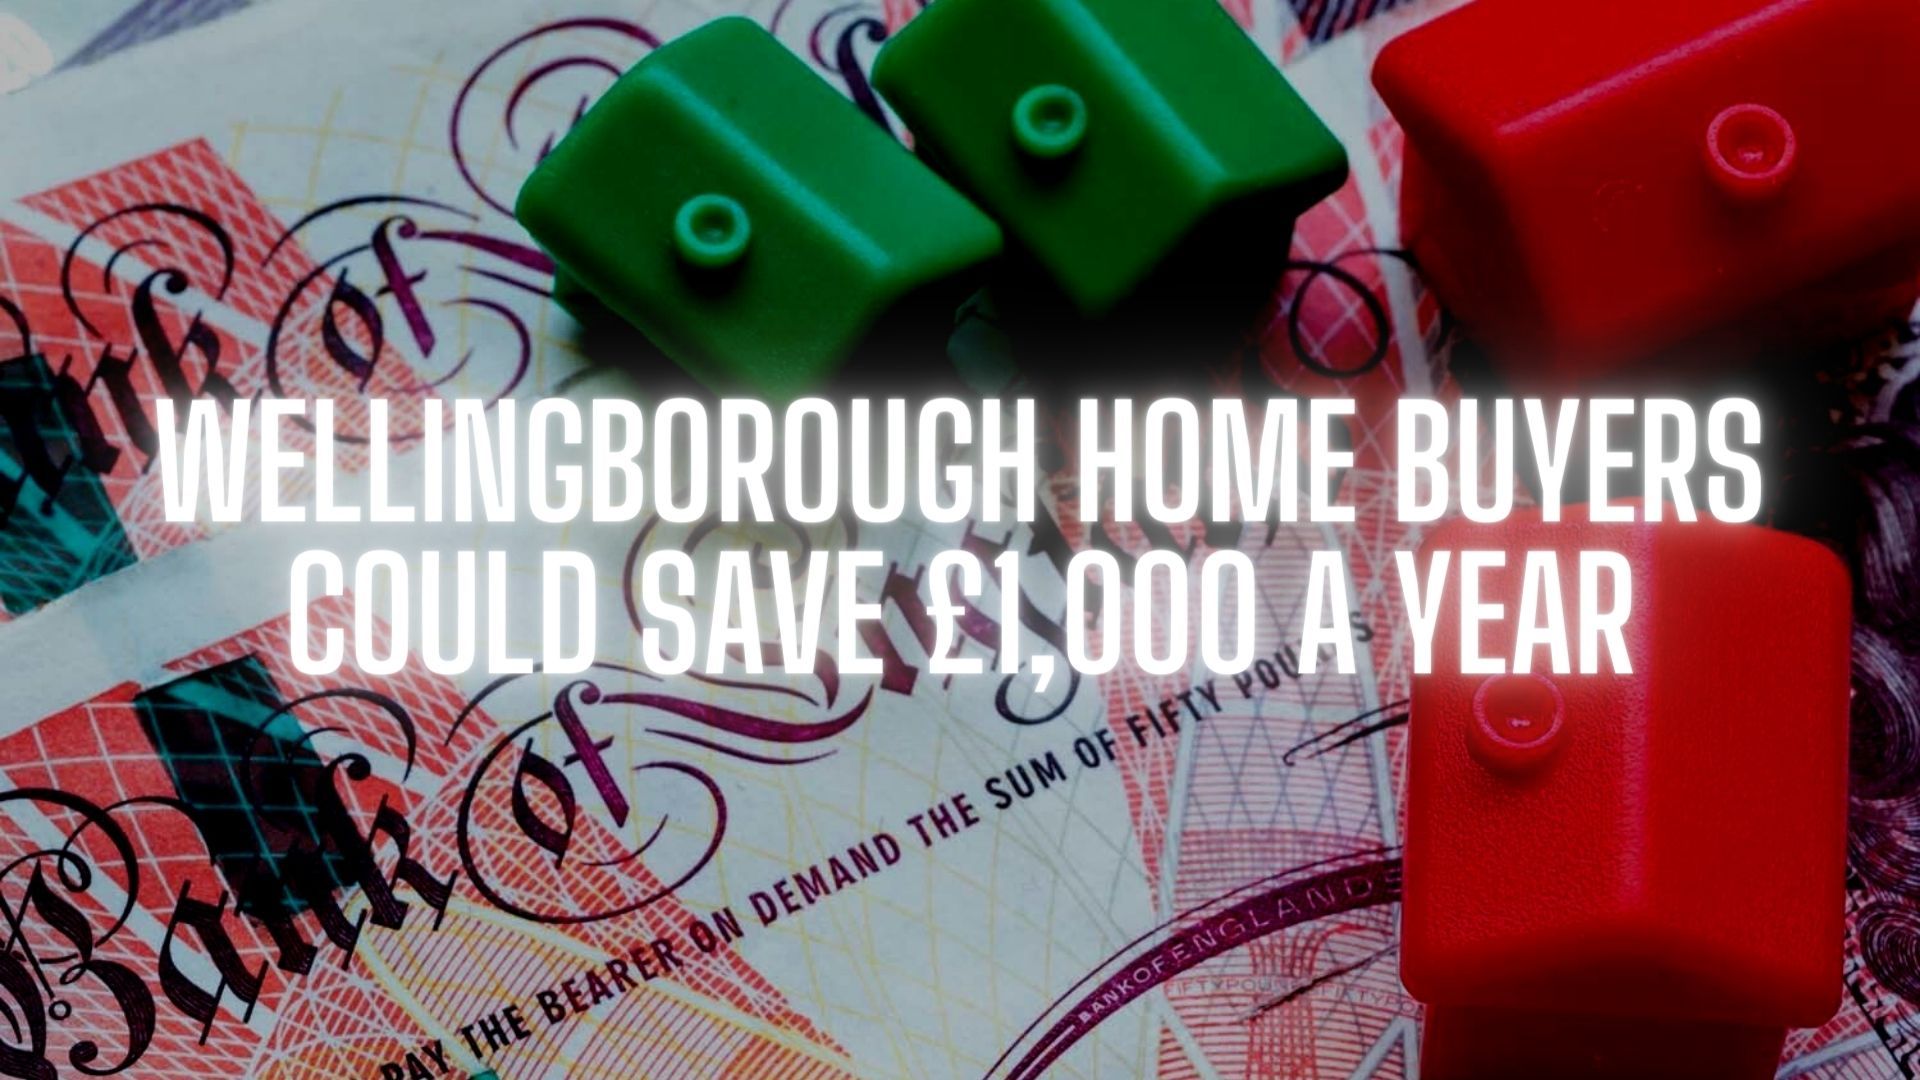 Wellingborough Home Buyers Could Save £1,000 a Year